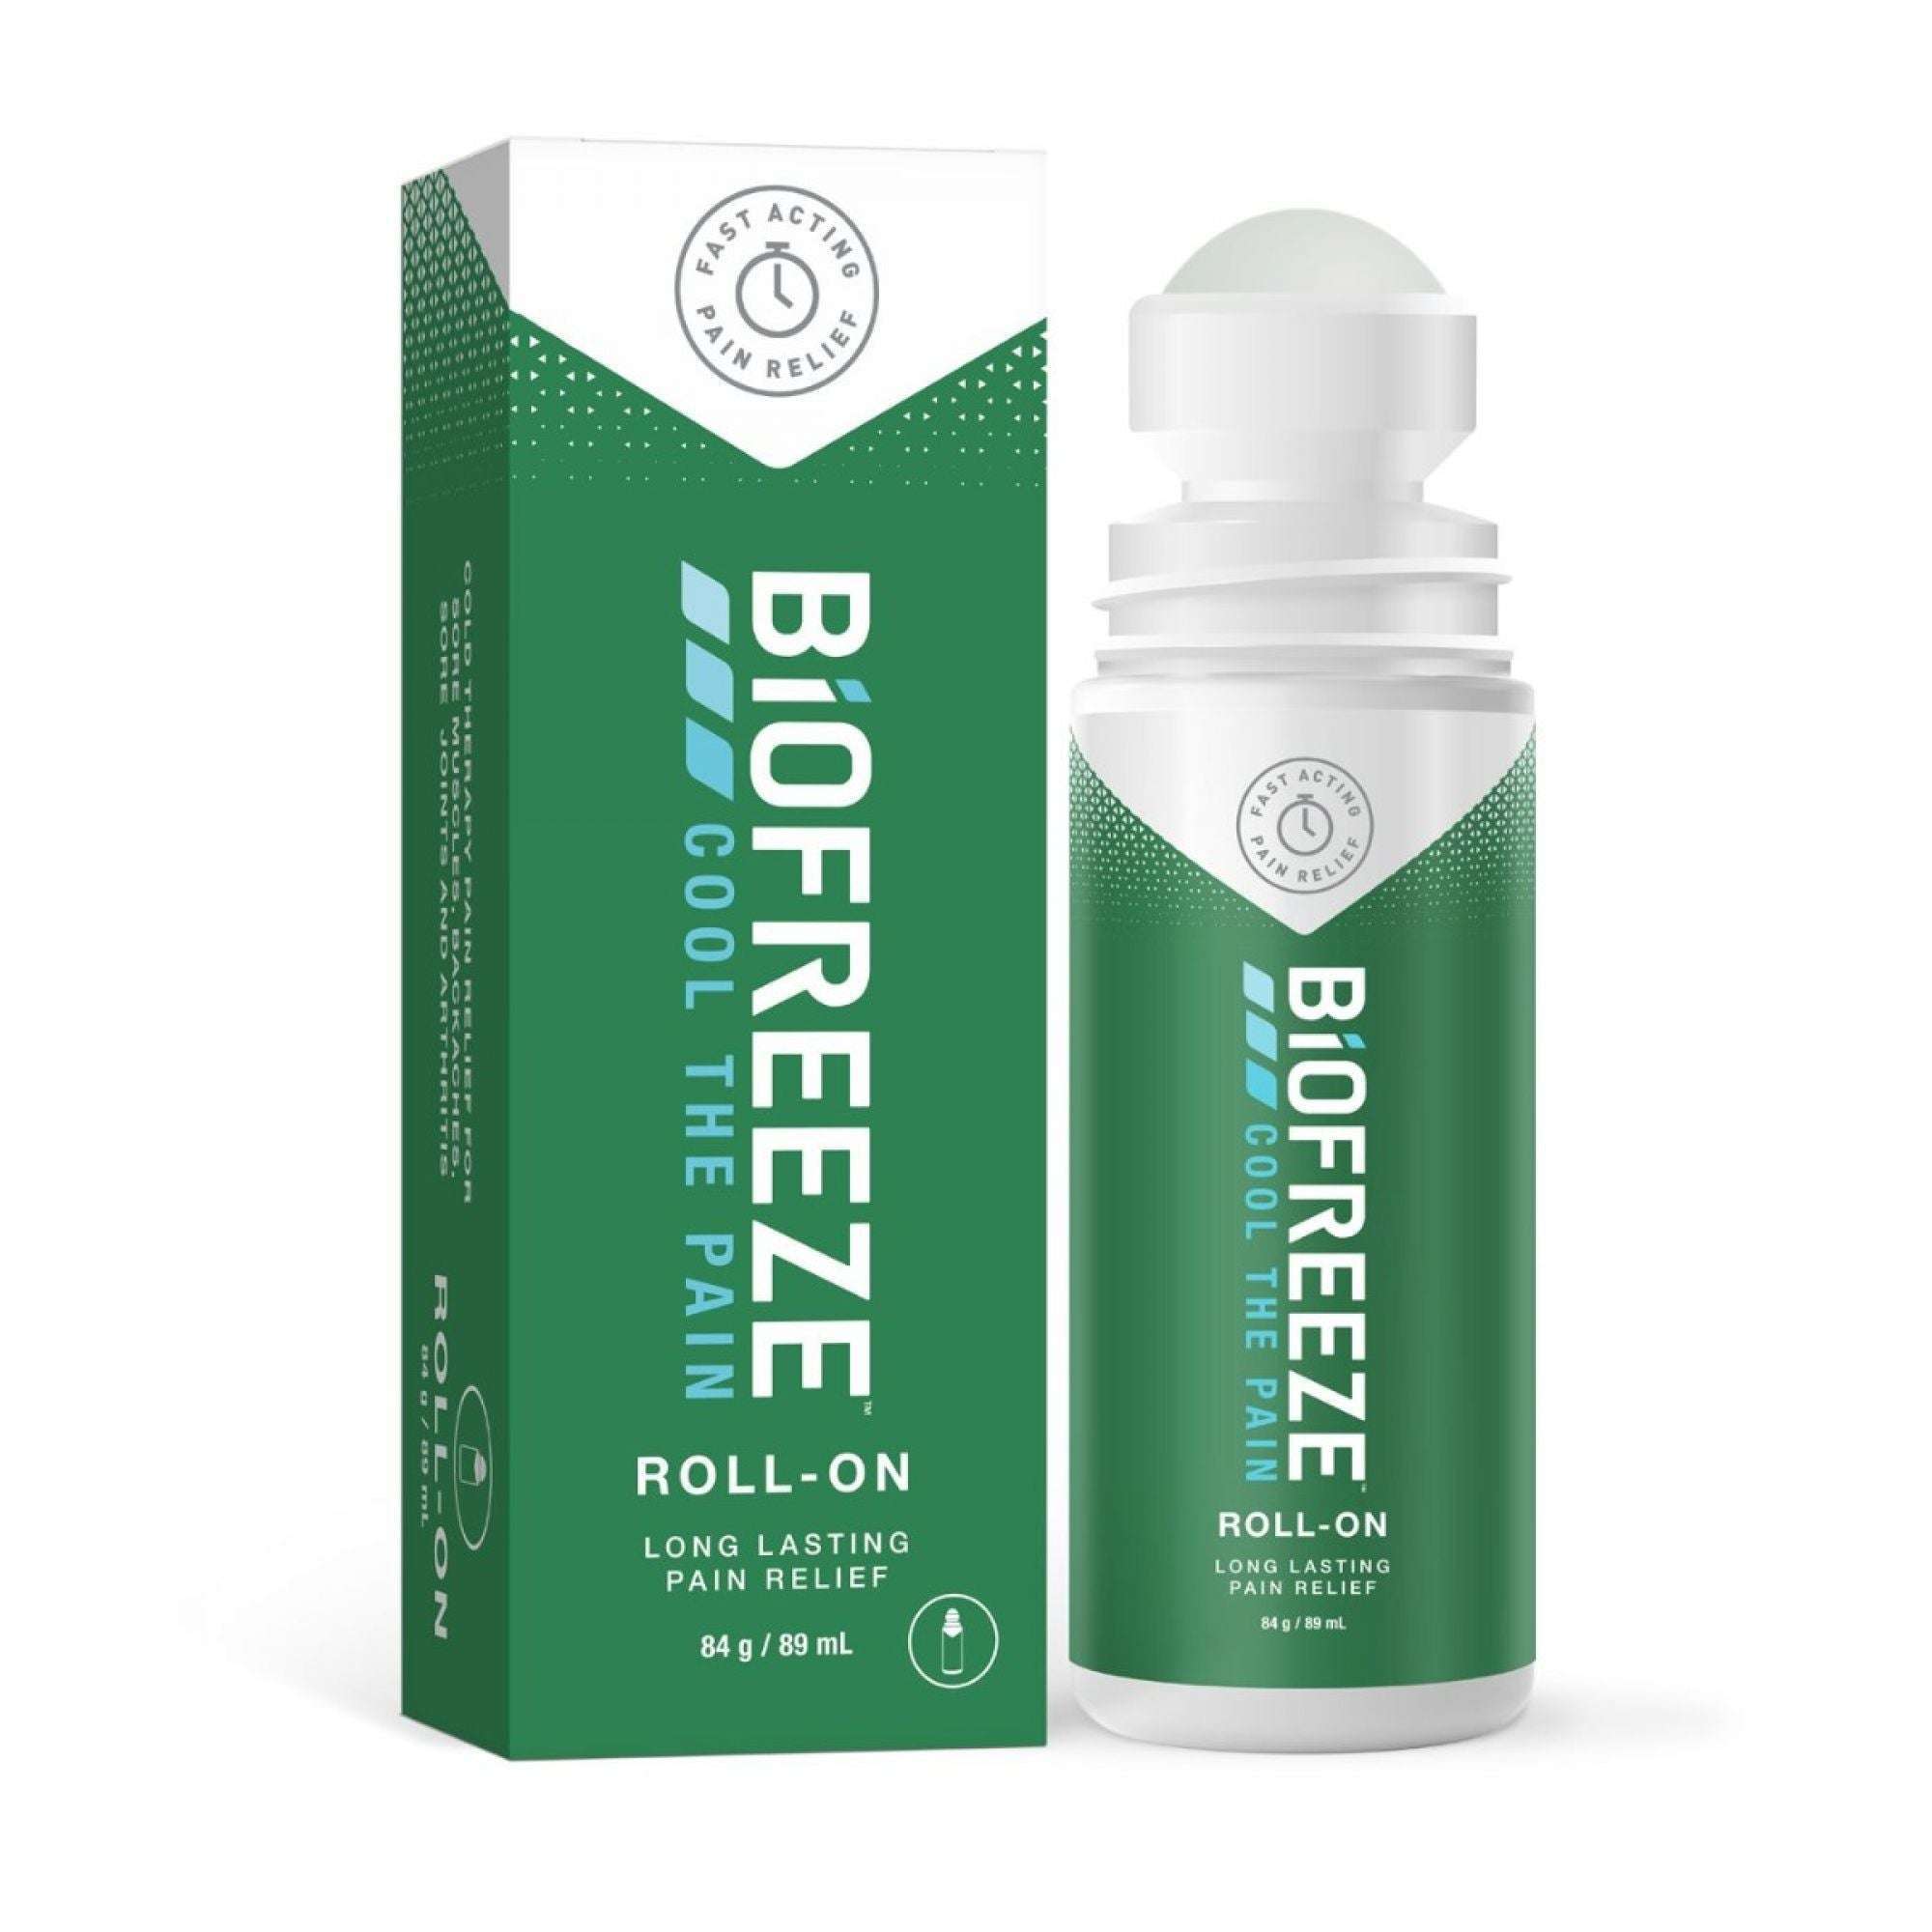 Why Does Biofreeze Work So Well